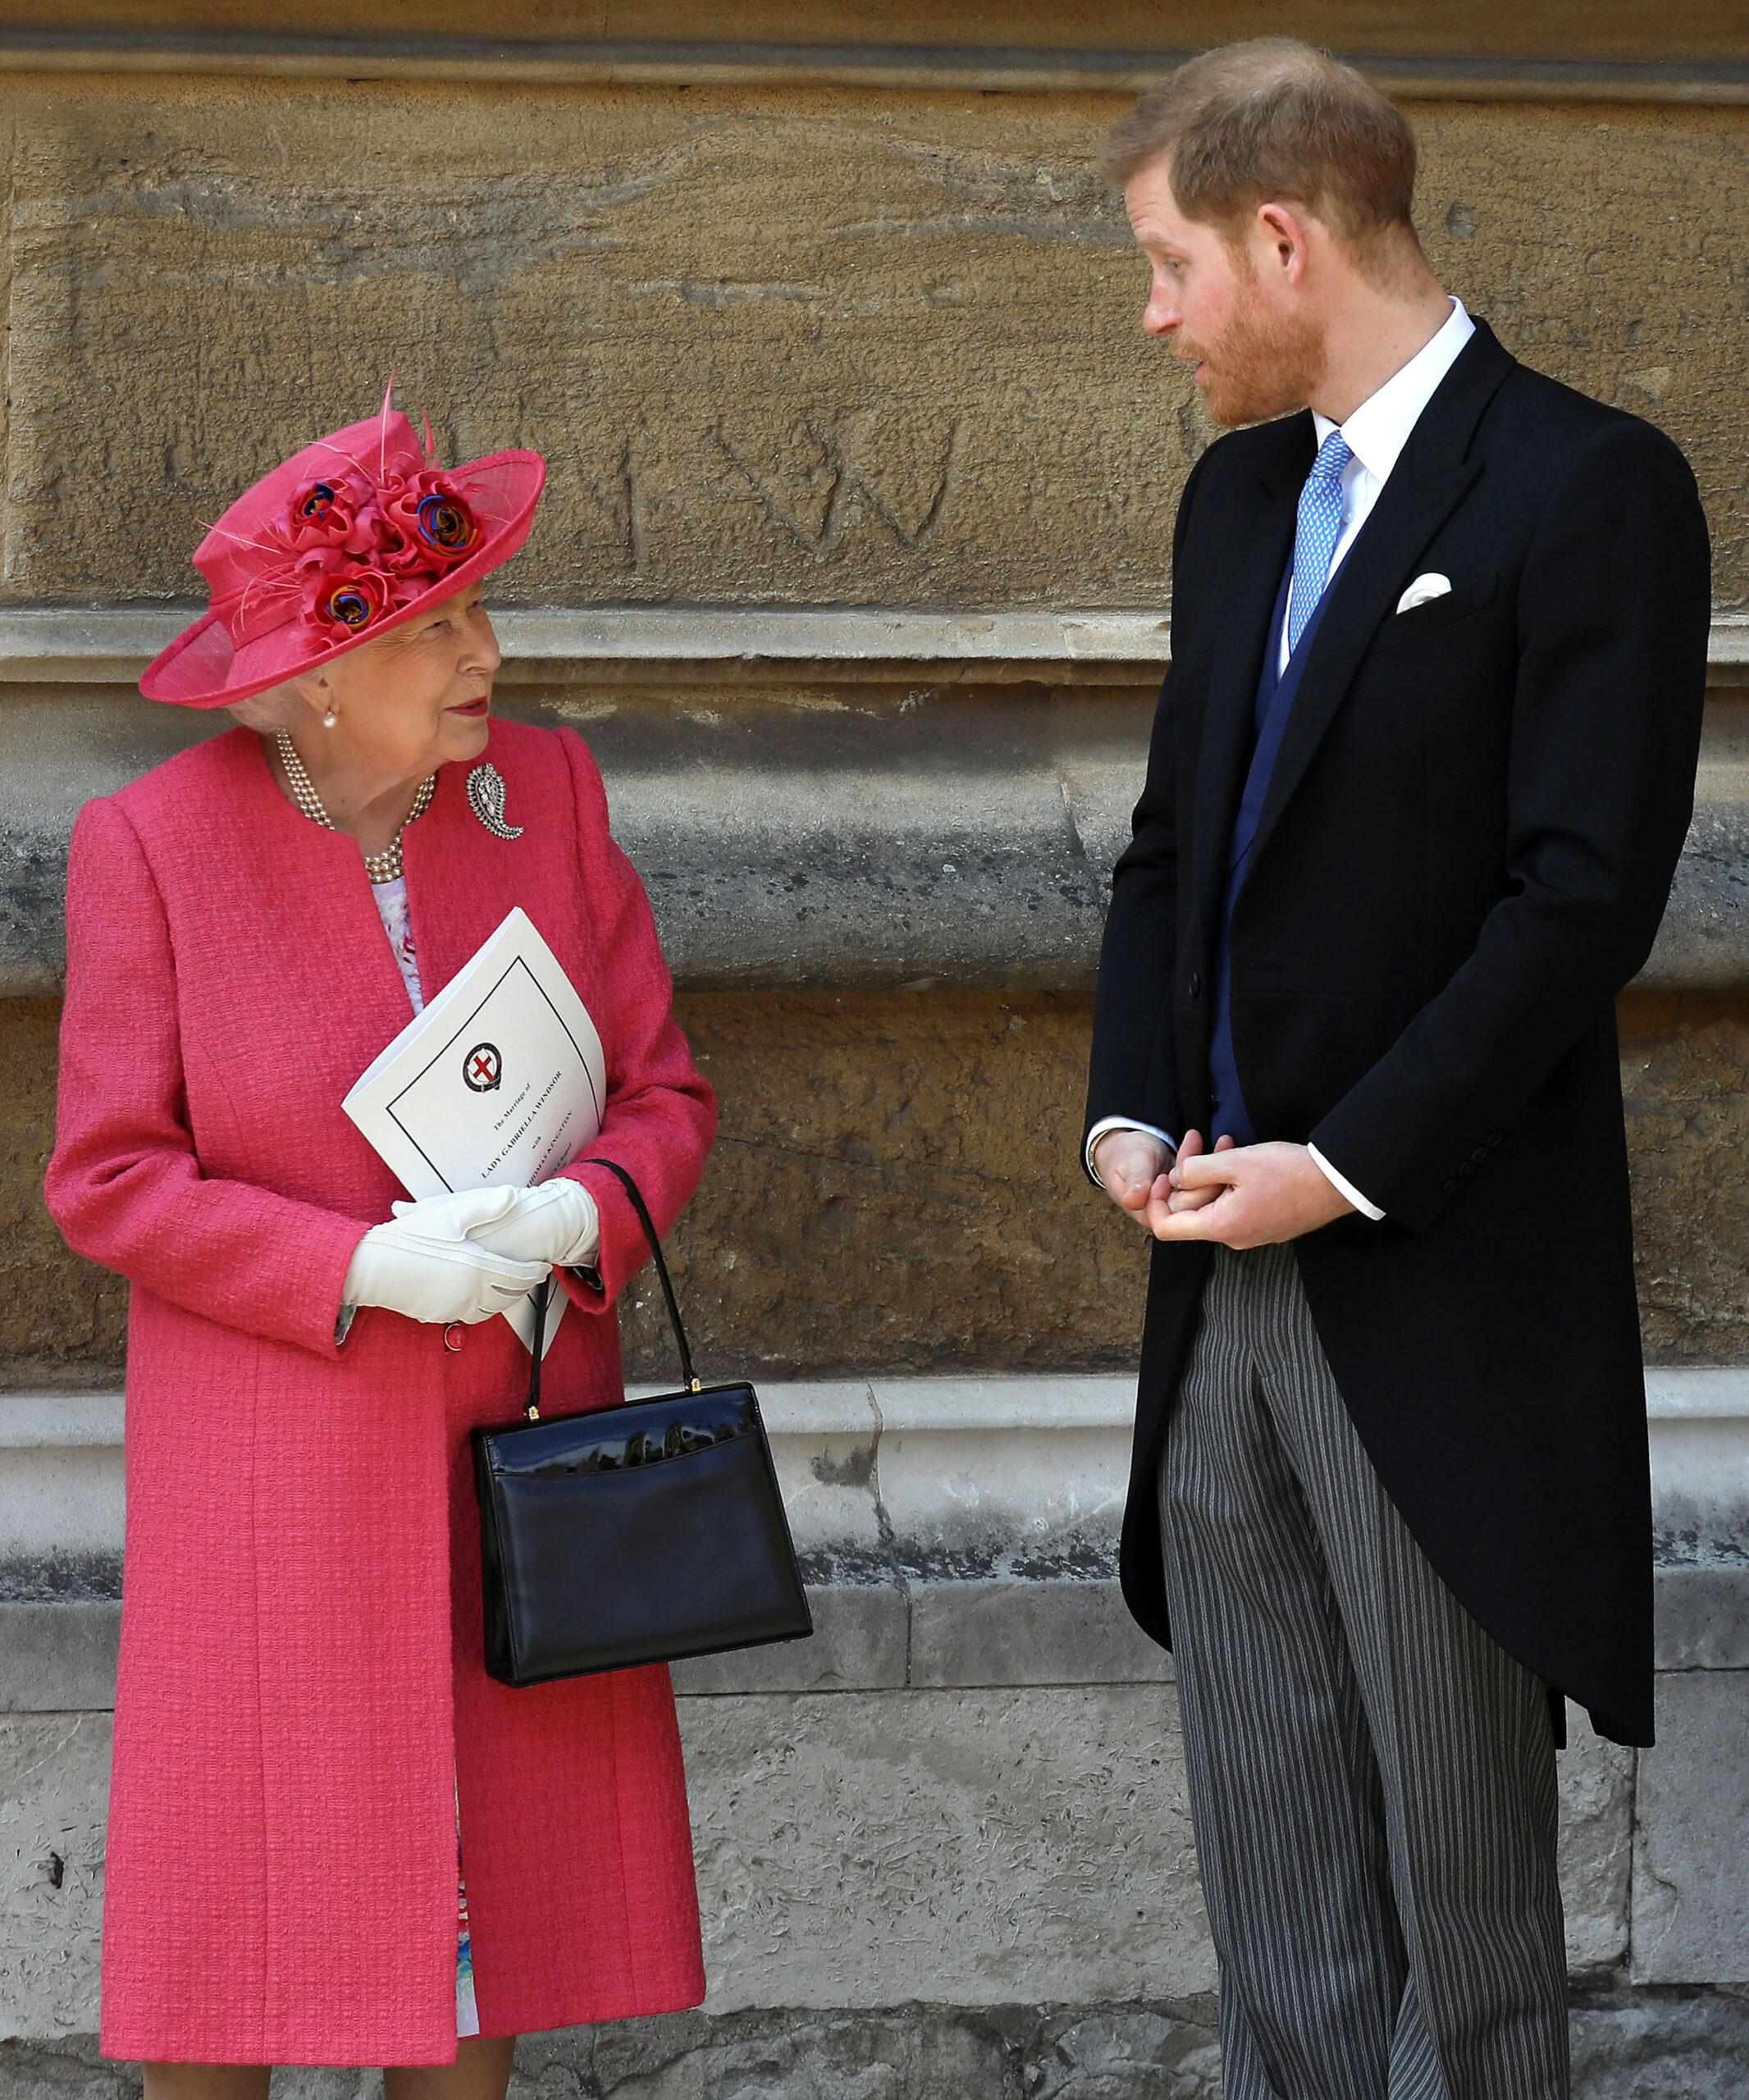 Queen Elizabeth and Prince Harry, Duke of Sussex, attend the Wedding of Lady Gabriella Windsor and Mr Thomas Kingston